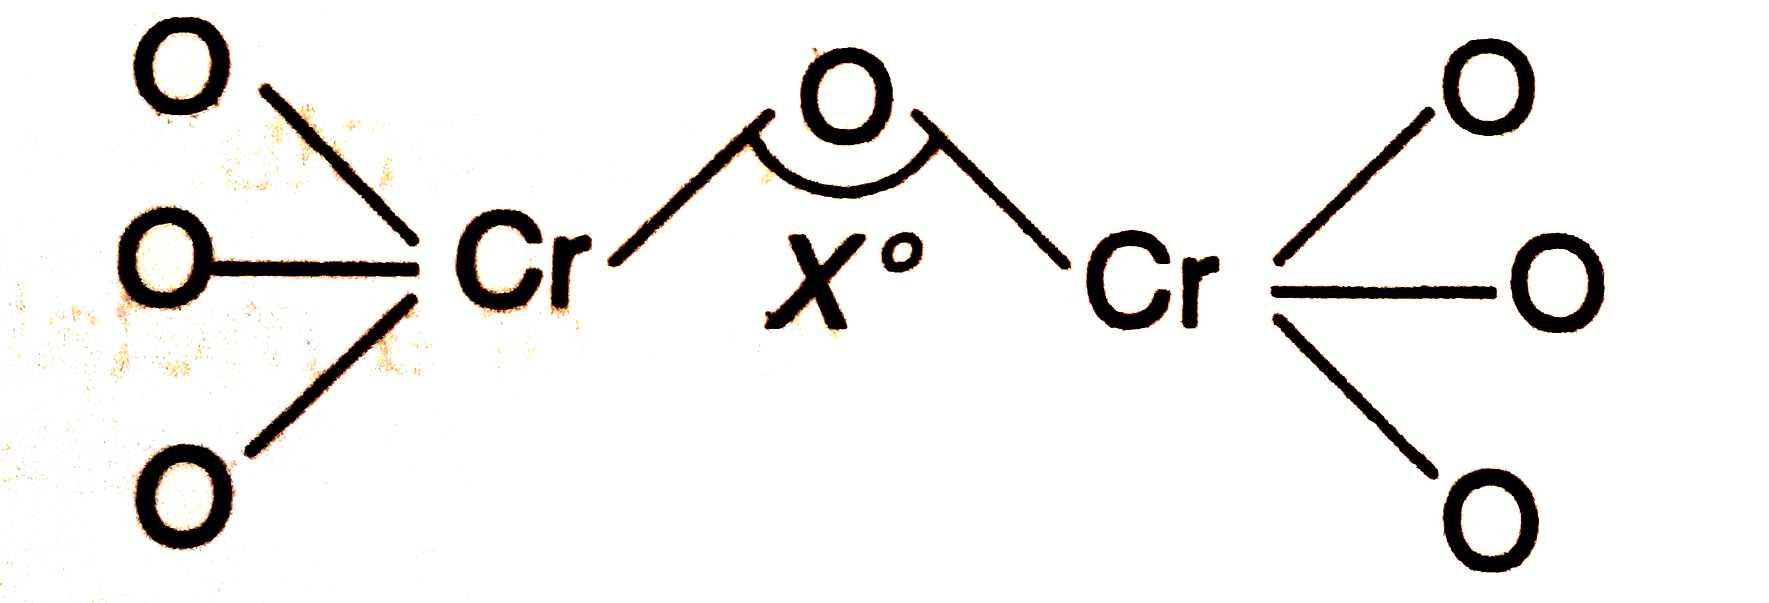 In the following figure the Cr-O-Cr bond angle is of X^(o). What is the exact value of X?